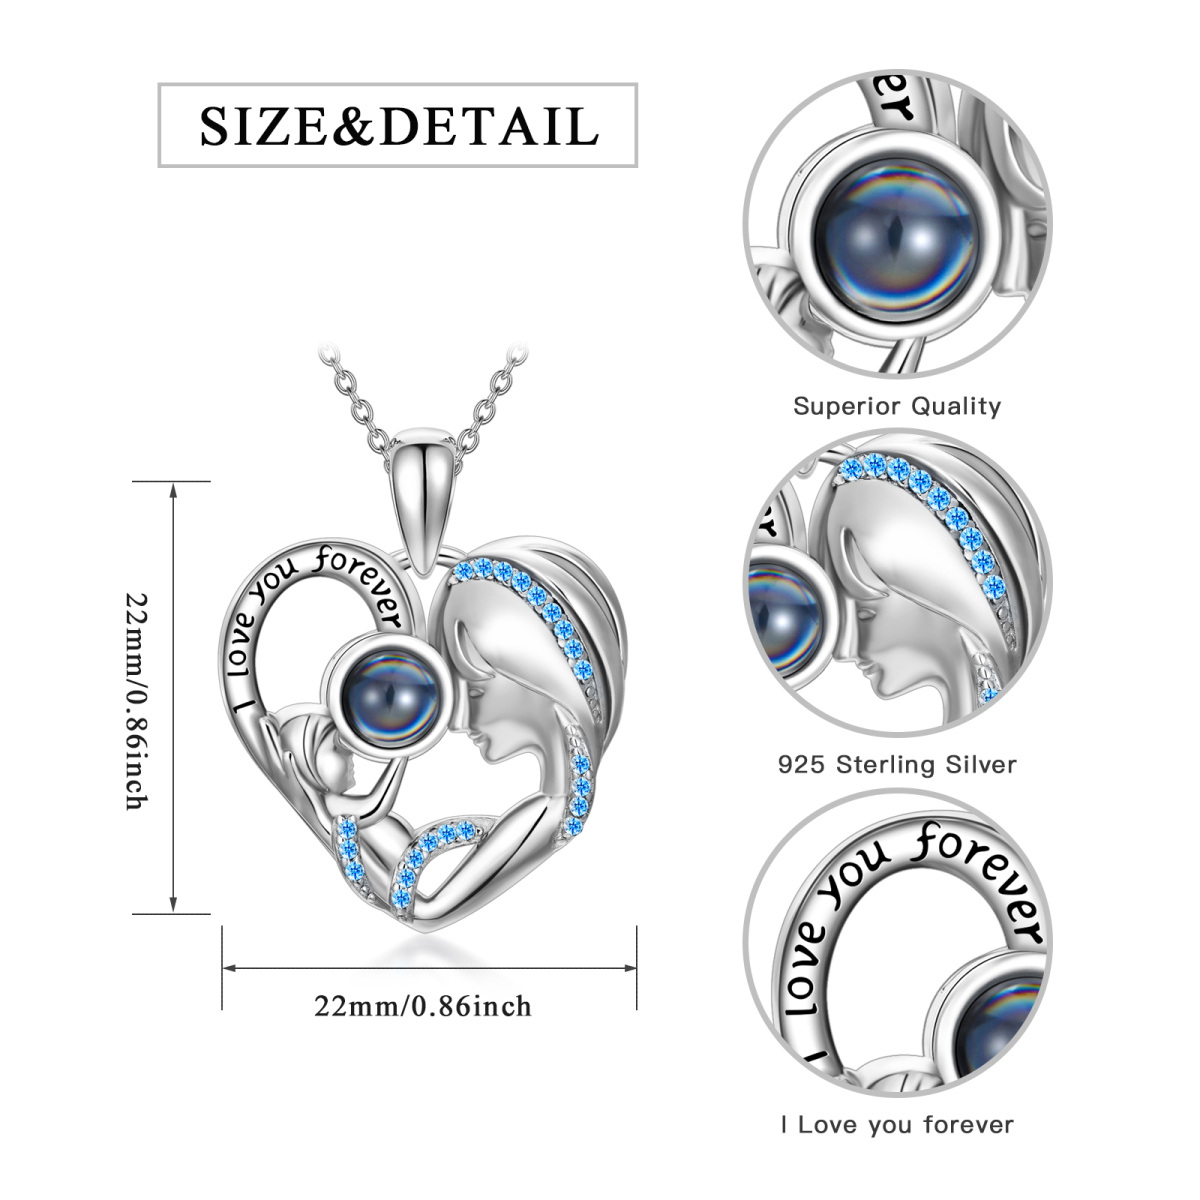 Sterling Silver Circular Shaped Projection Stone Heart Personalized Pendant Necklace with Engraved Word-7